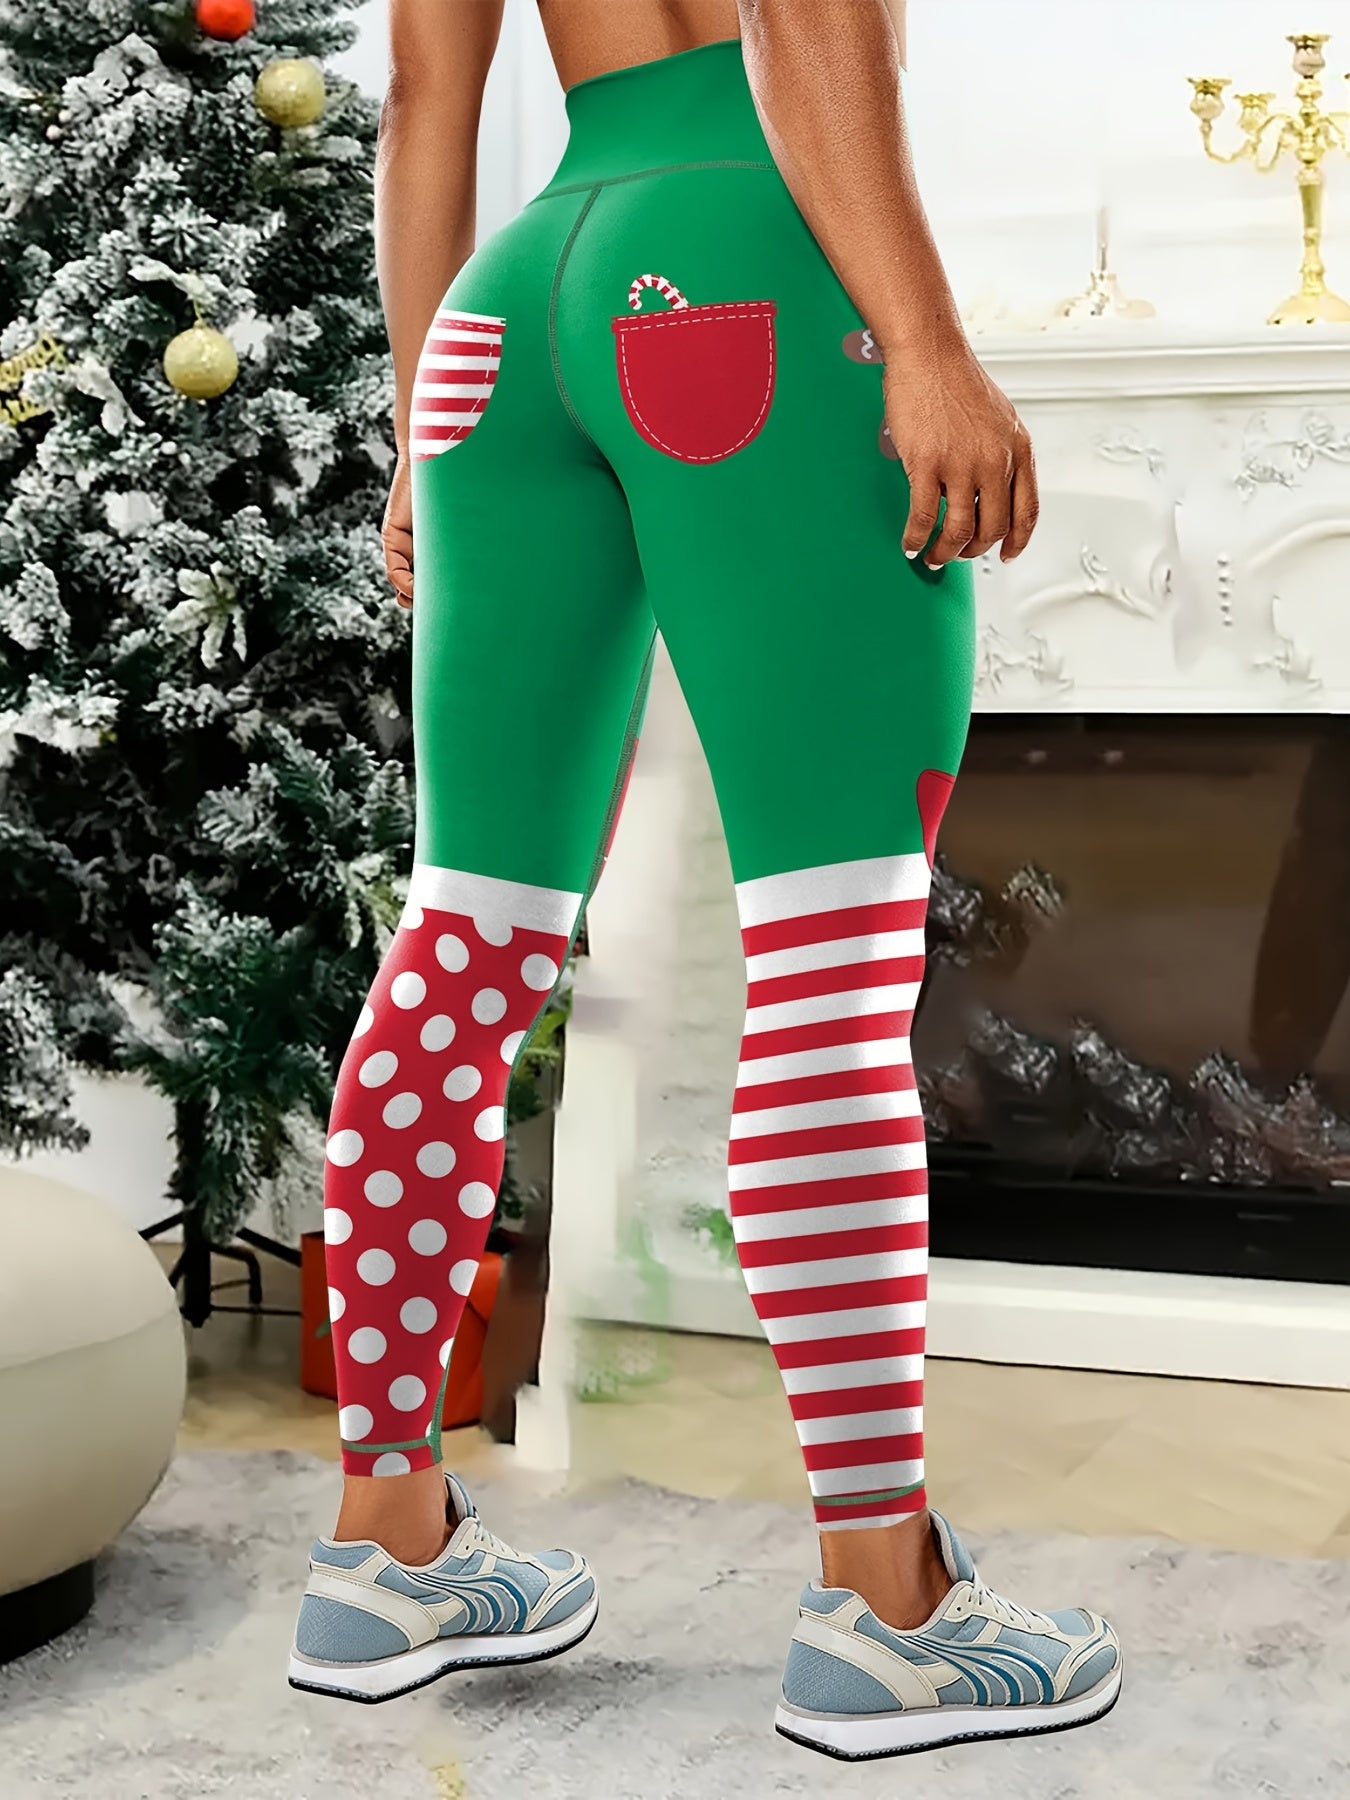 Christmas Ball Pattern Striped Yoga Leggings, High Stretch Breathable Slim Fitted Sports Tights, Women's Activewear